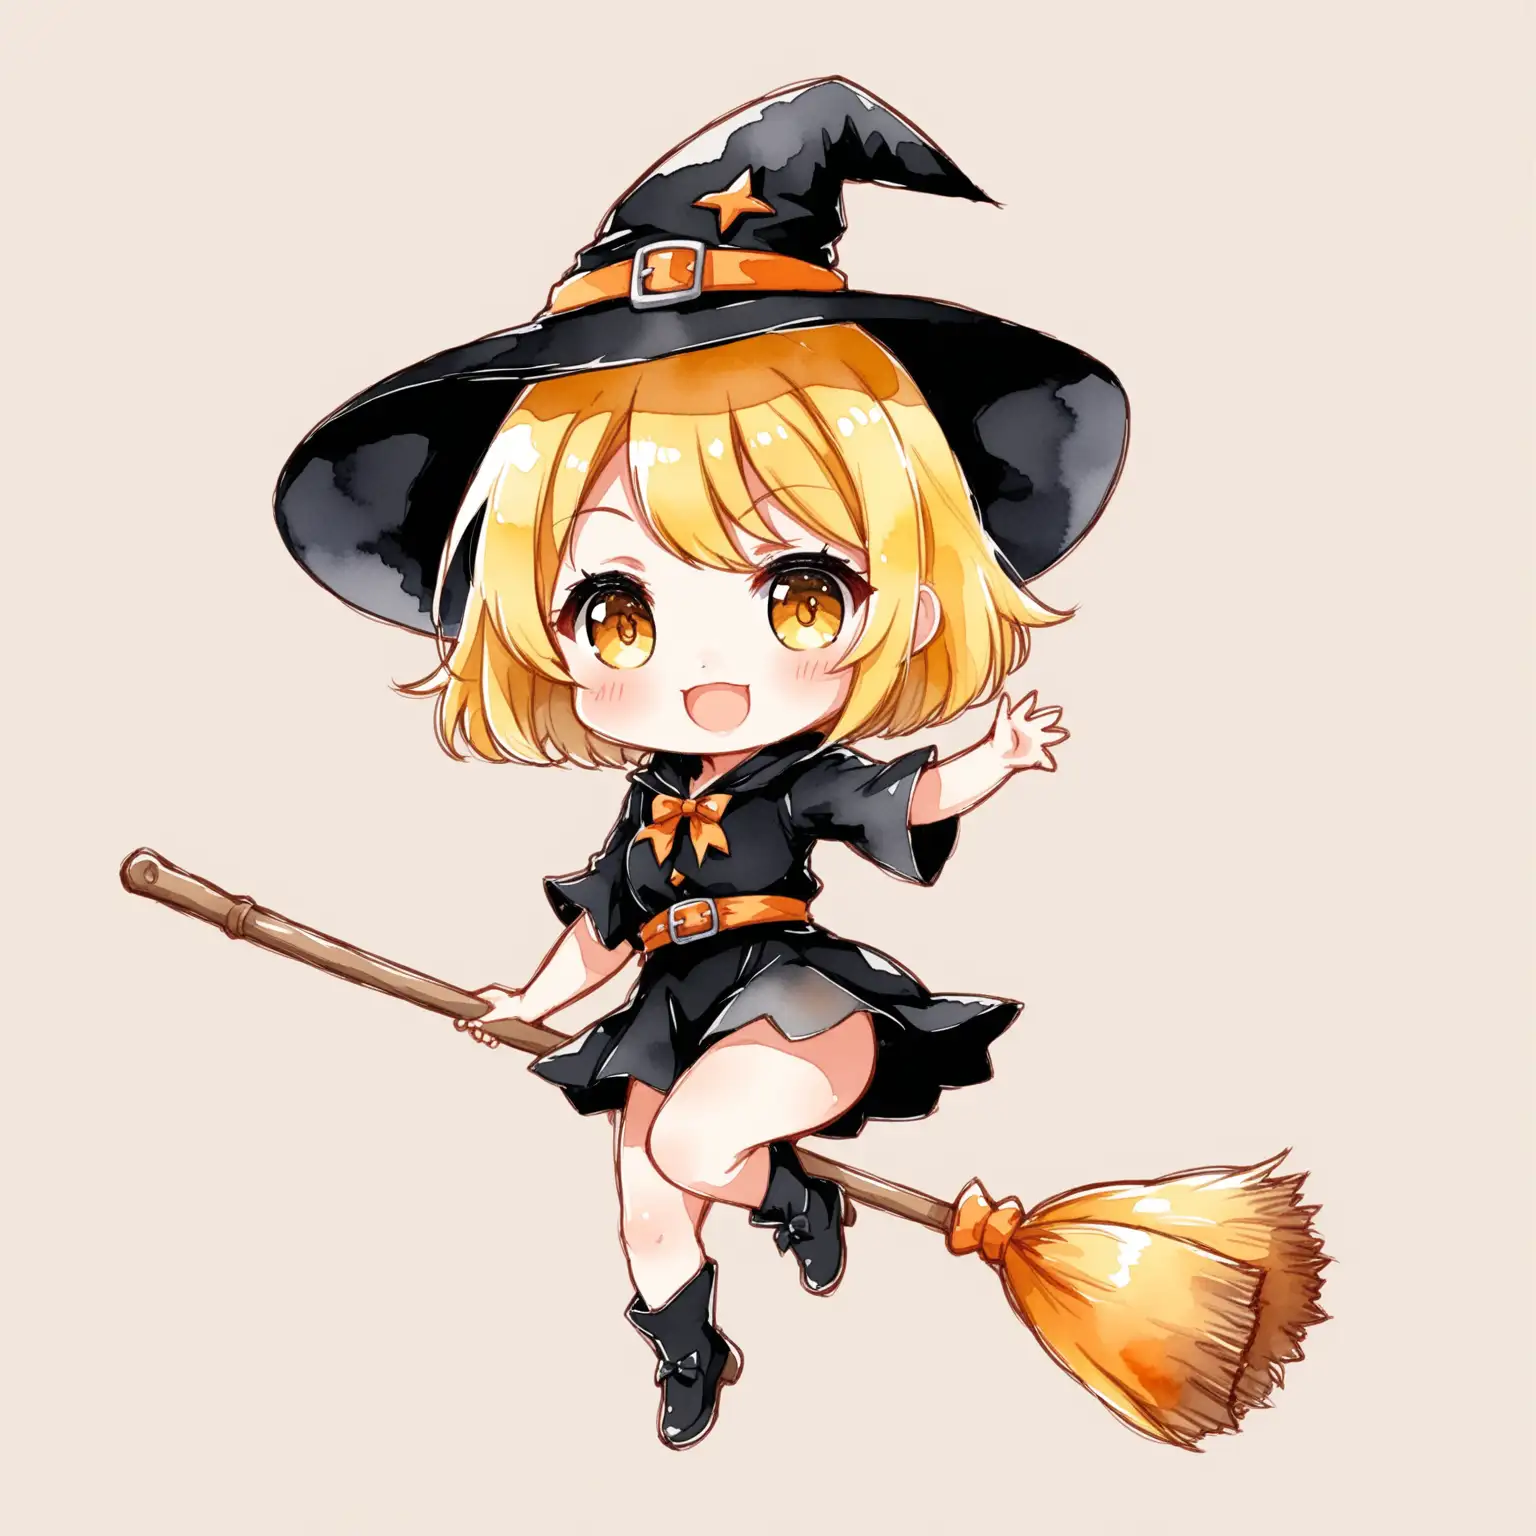 Anime cute girl, sd style,  chibi style, watercolor style, playful, witch costume, riding a broom, short skirt, blonde short hair, no background, full body.